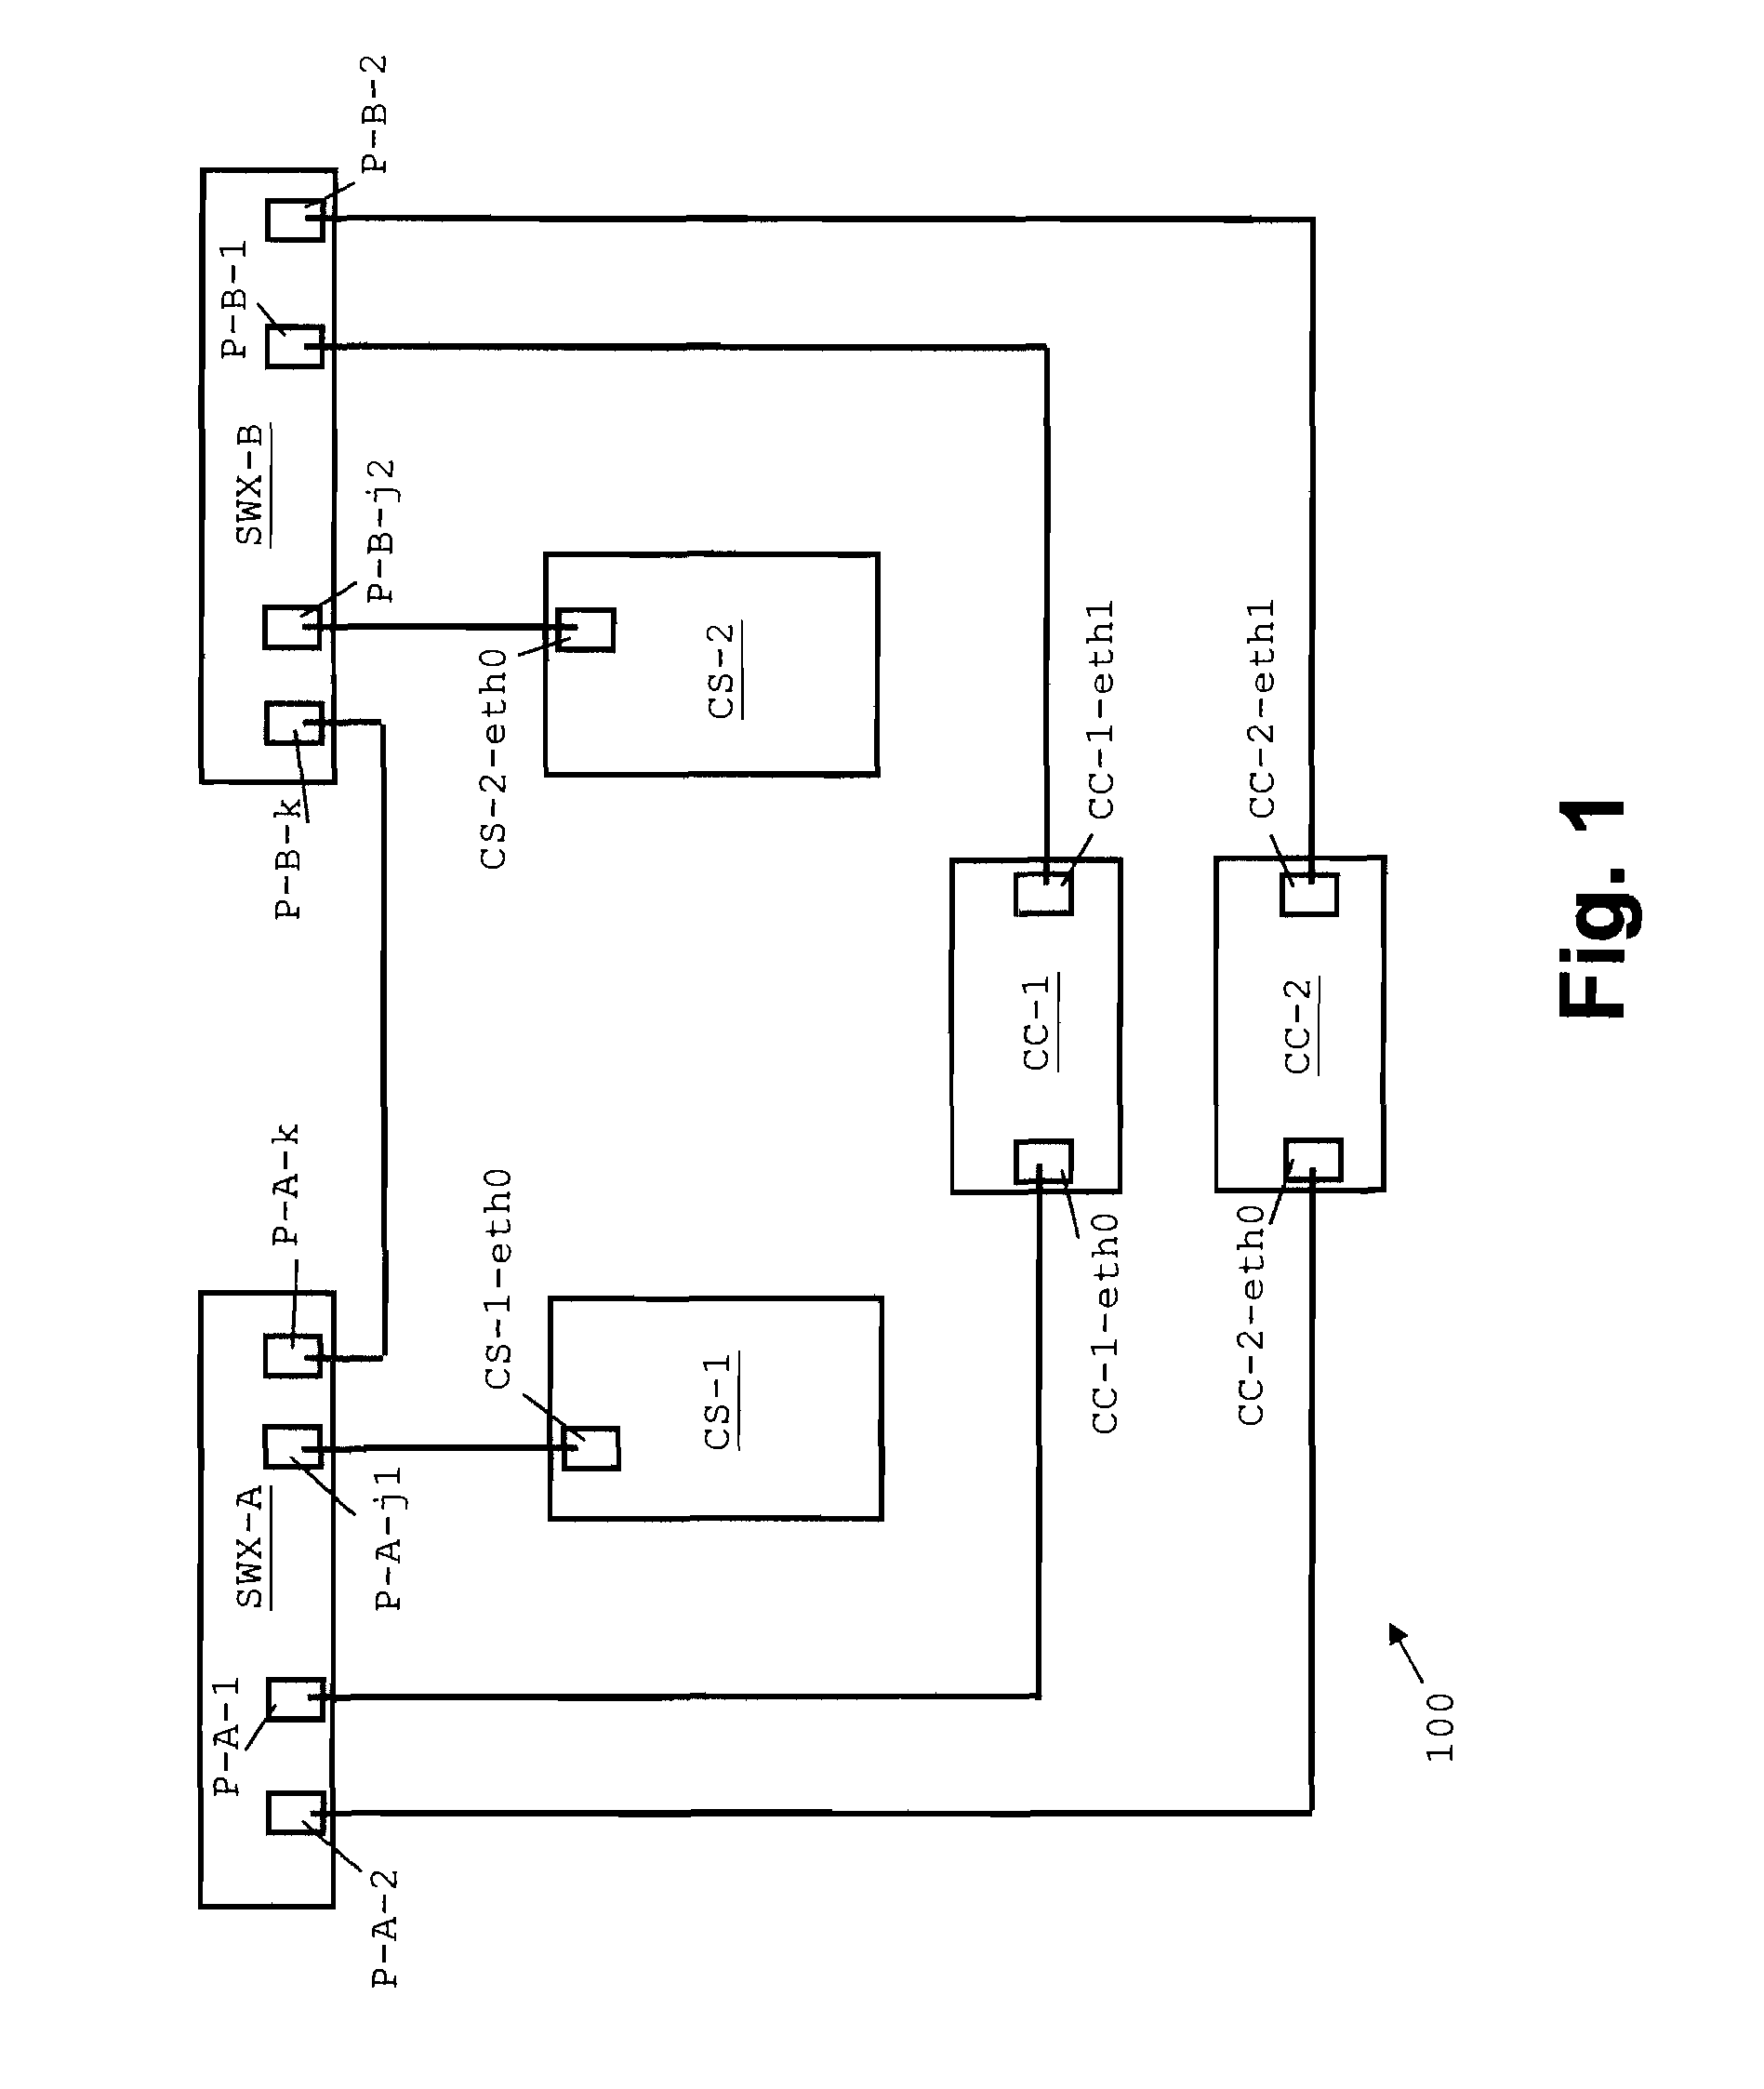 Network and Method for the Configuration Thereof